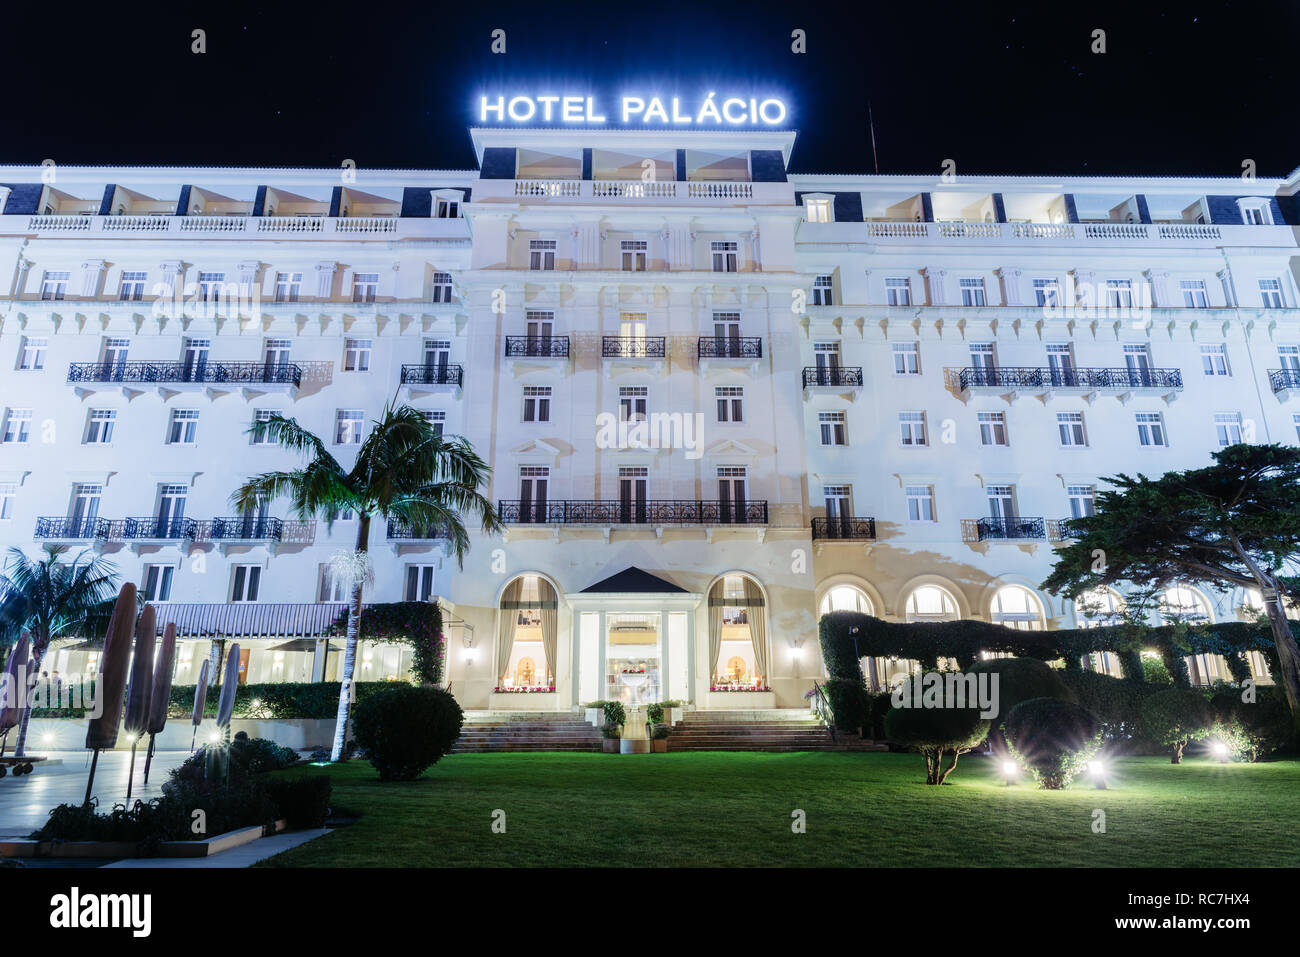 Front facade of the famous Hotel Palacio which was frequented by both German & Allied spies during WWII, as well as Ian Fleming, creator of James Bond Stock Photo